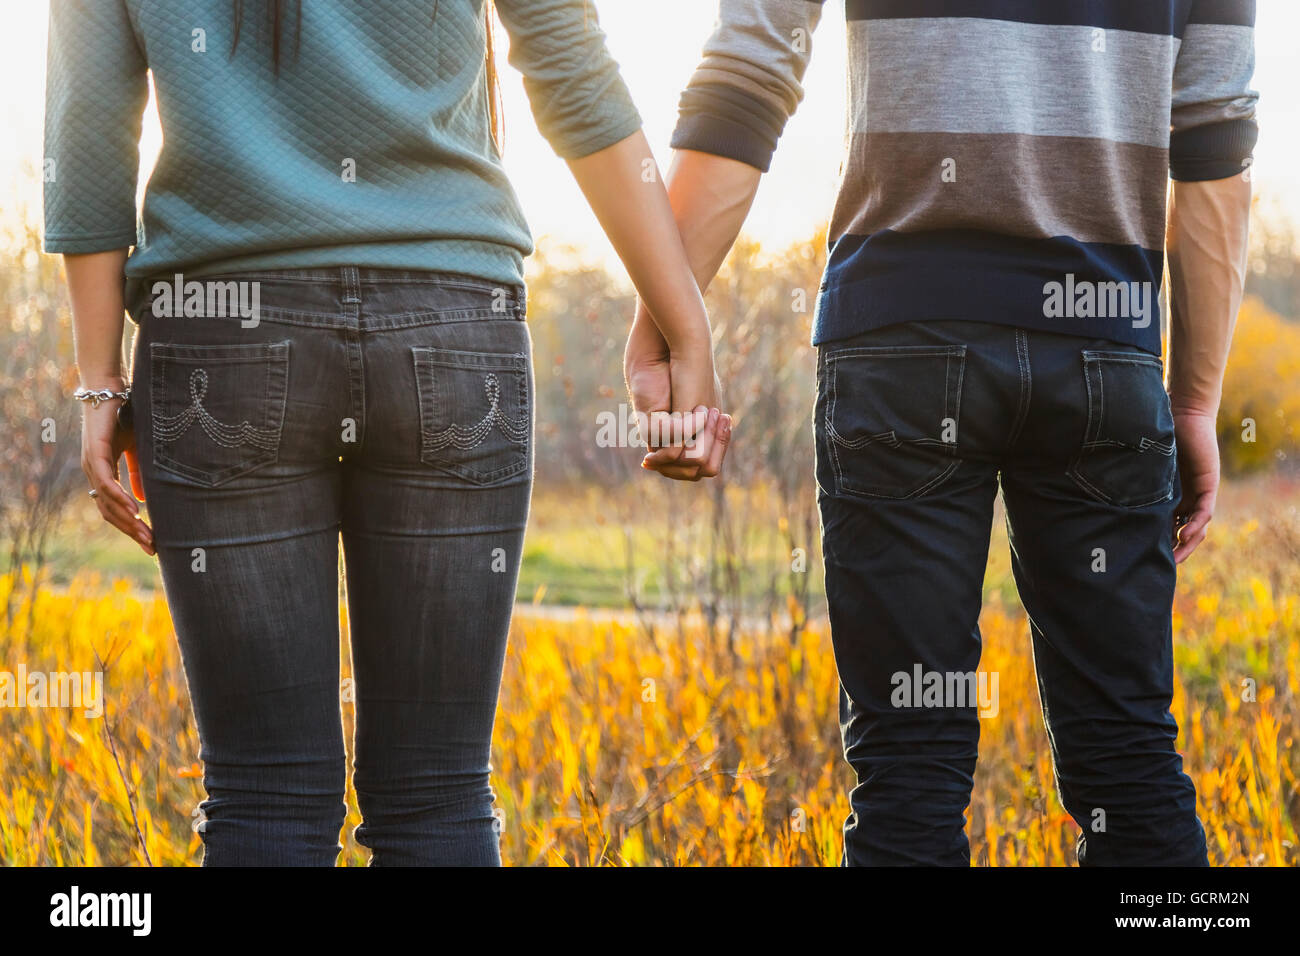 A young couple enjoying quality time together outdoors in a park in autumn and holding hands in the warmth of the sunlight during the early evening Stock Photo